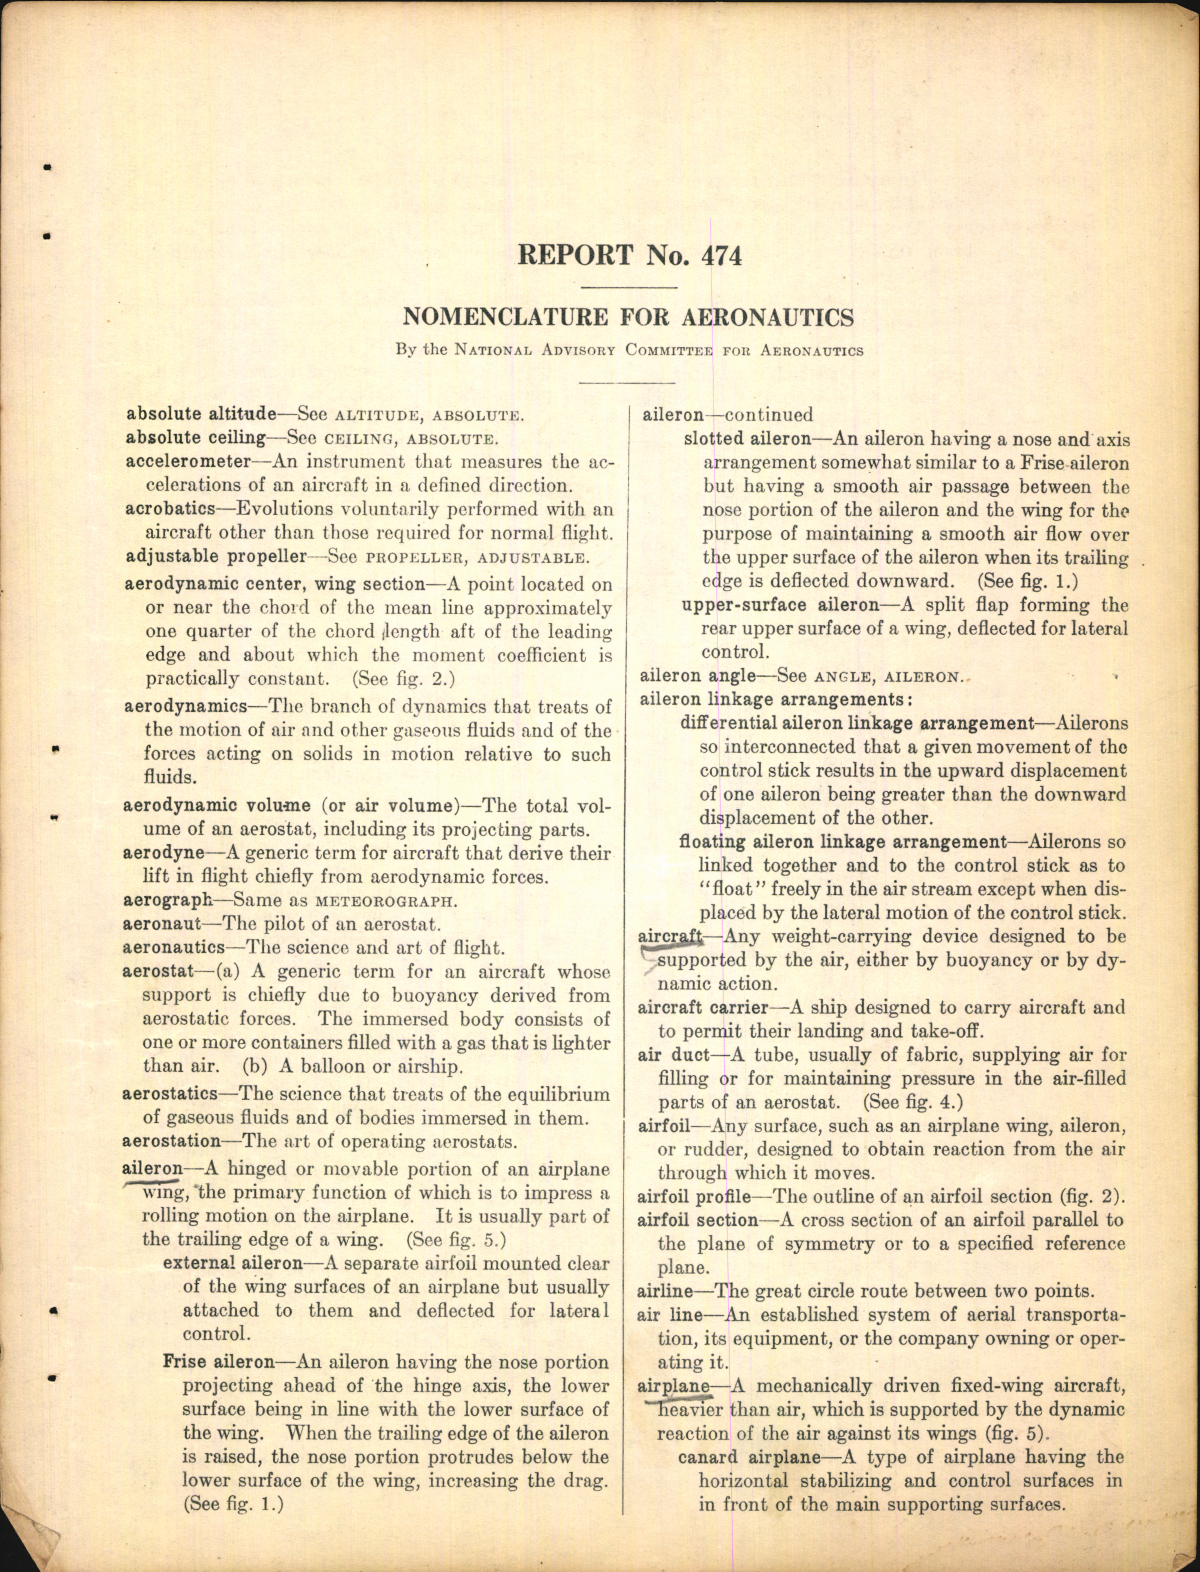 Sample page 5 from AirCorps Library document: The Air Corps Technical School; Nomenclature for Aeronautics 